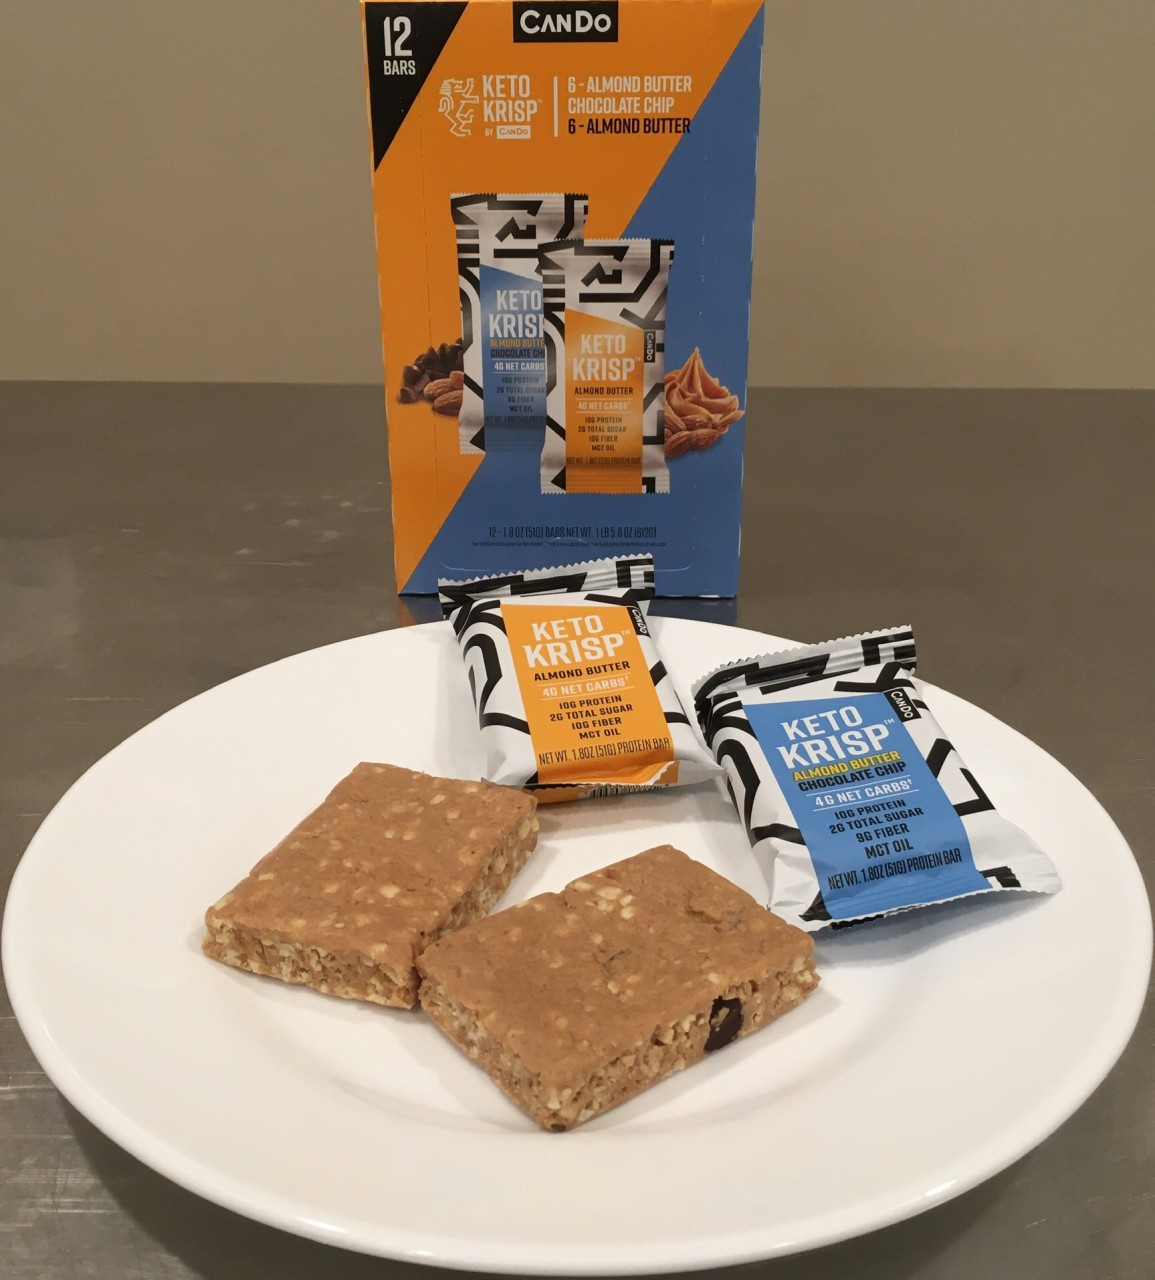 <a class="bx-tag" rel="tag" href="https://streetloc.com/view-channel-profile/whatsforsnack"><s>#</s><b>whatsforsnack</b></a> CanDo Keto Krisp - Moist, creamy, delicious bar that you DON’T have to chase down with a drink. The Almond Butter Chocolate Chip tastes like cookie dough… even the texture adds to the cookie dough experience. Low Carb (4g net carbs); Modera